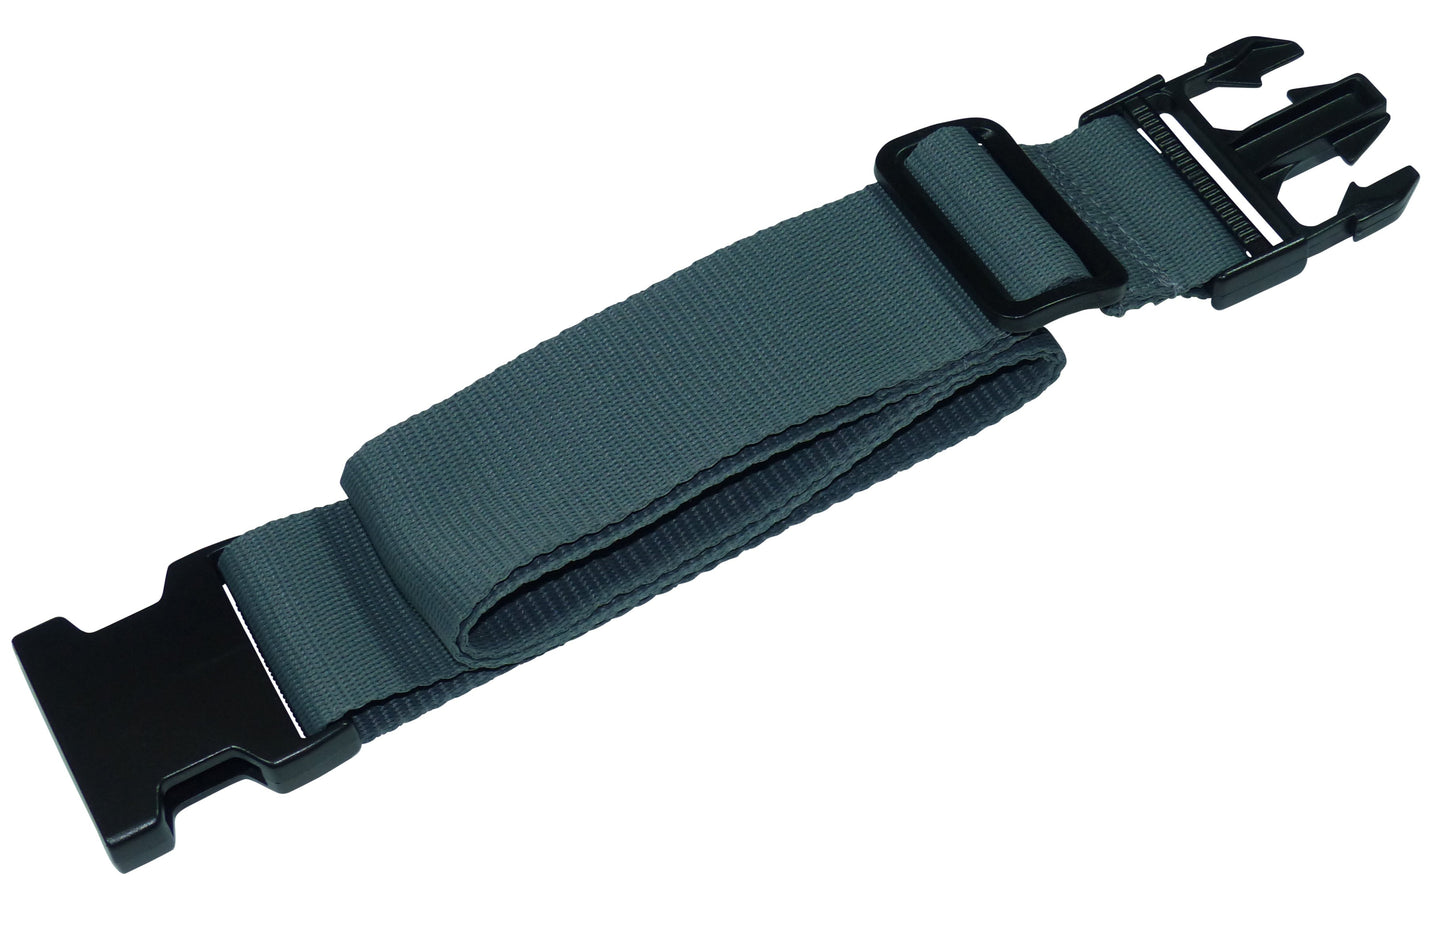 Benristraps 50mm Webbing Strap with Quick Release & Length-Adjusting Buckles in grey